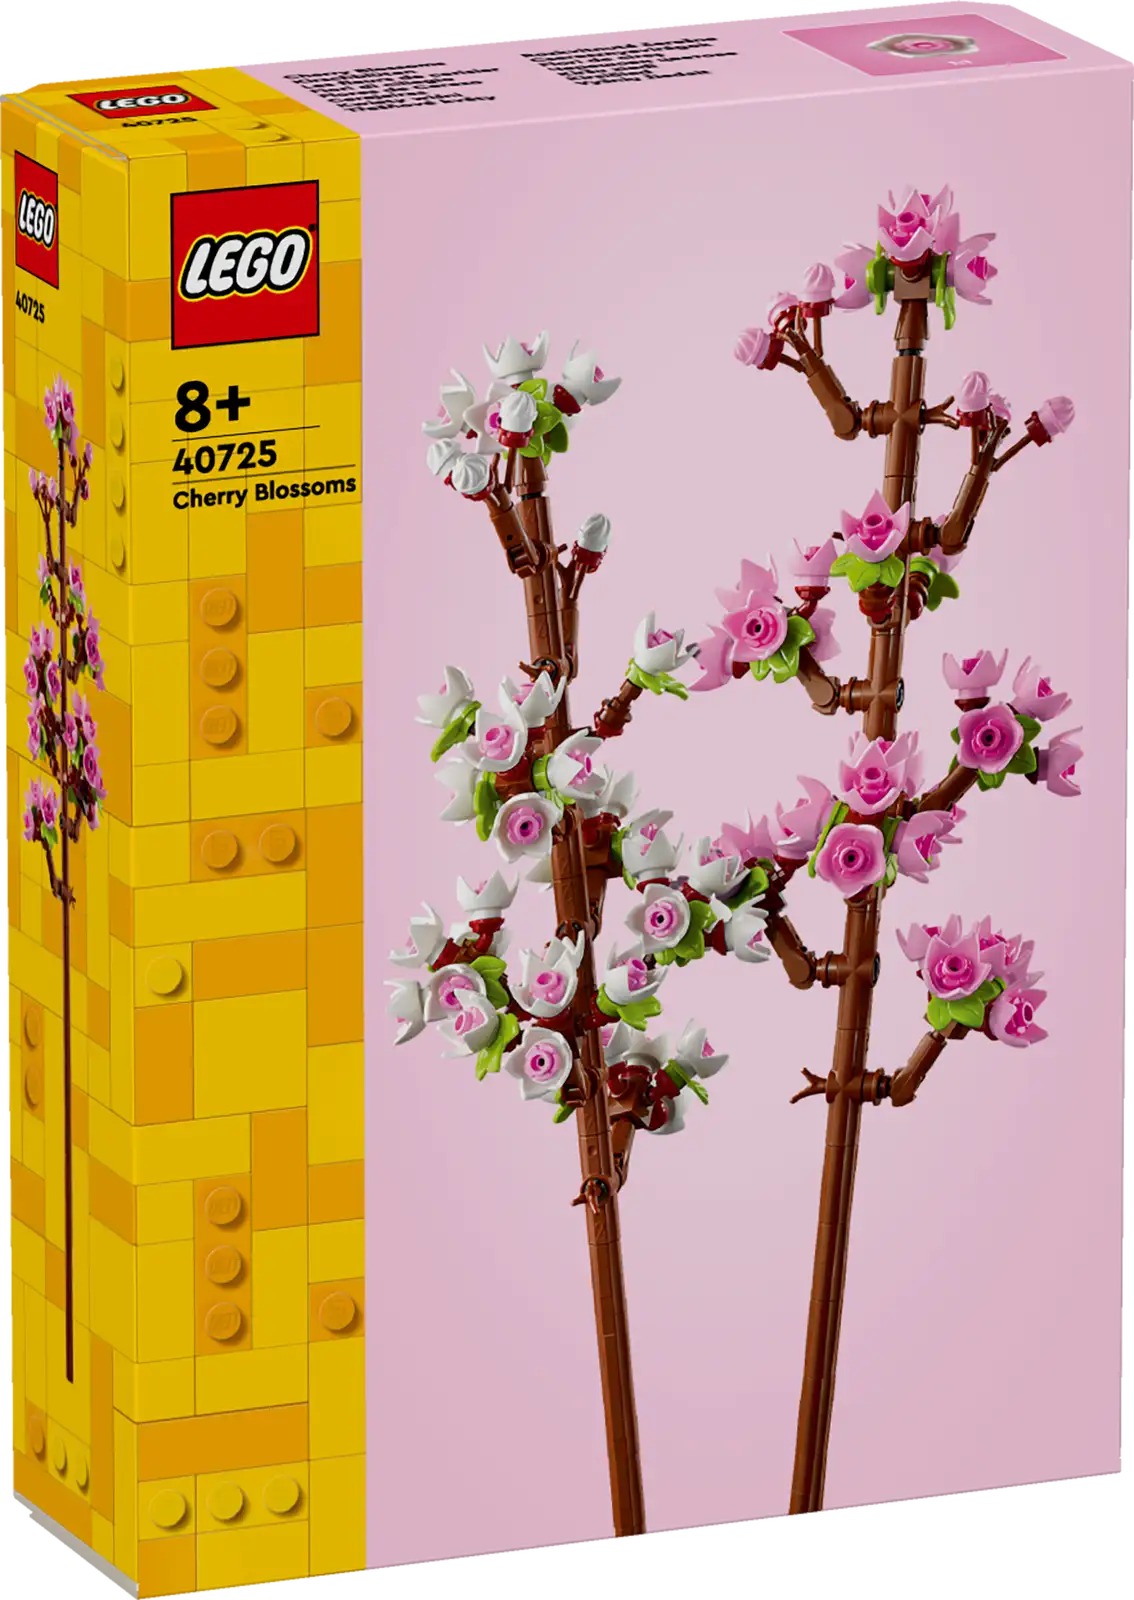 LEGO Botanical Collections Cherry Blossoms Set 40725 - US